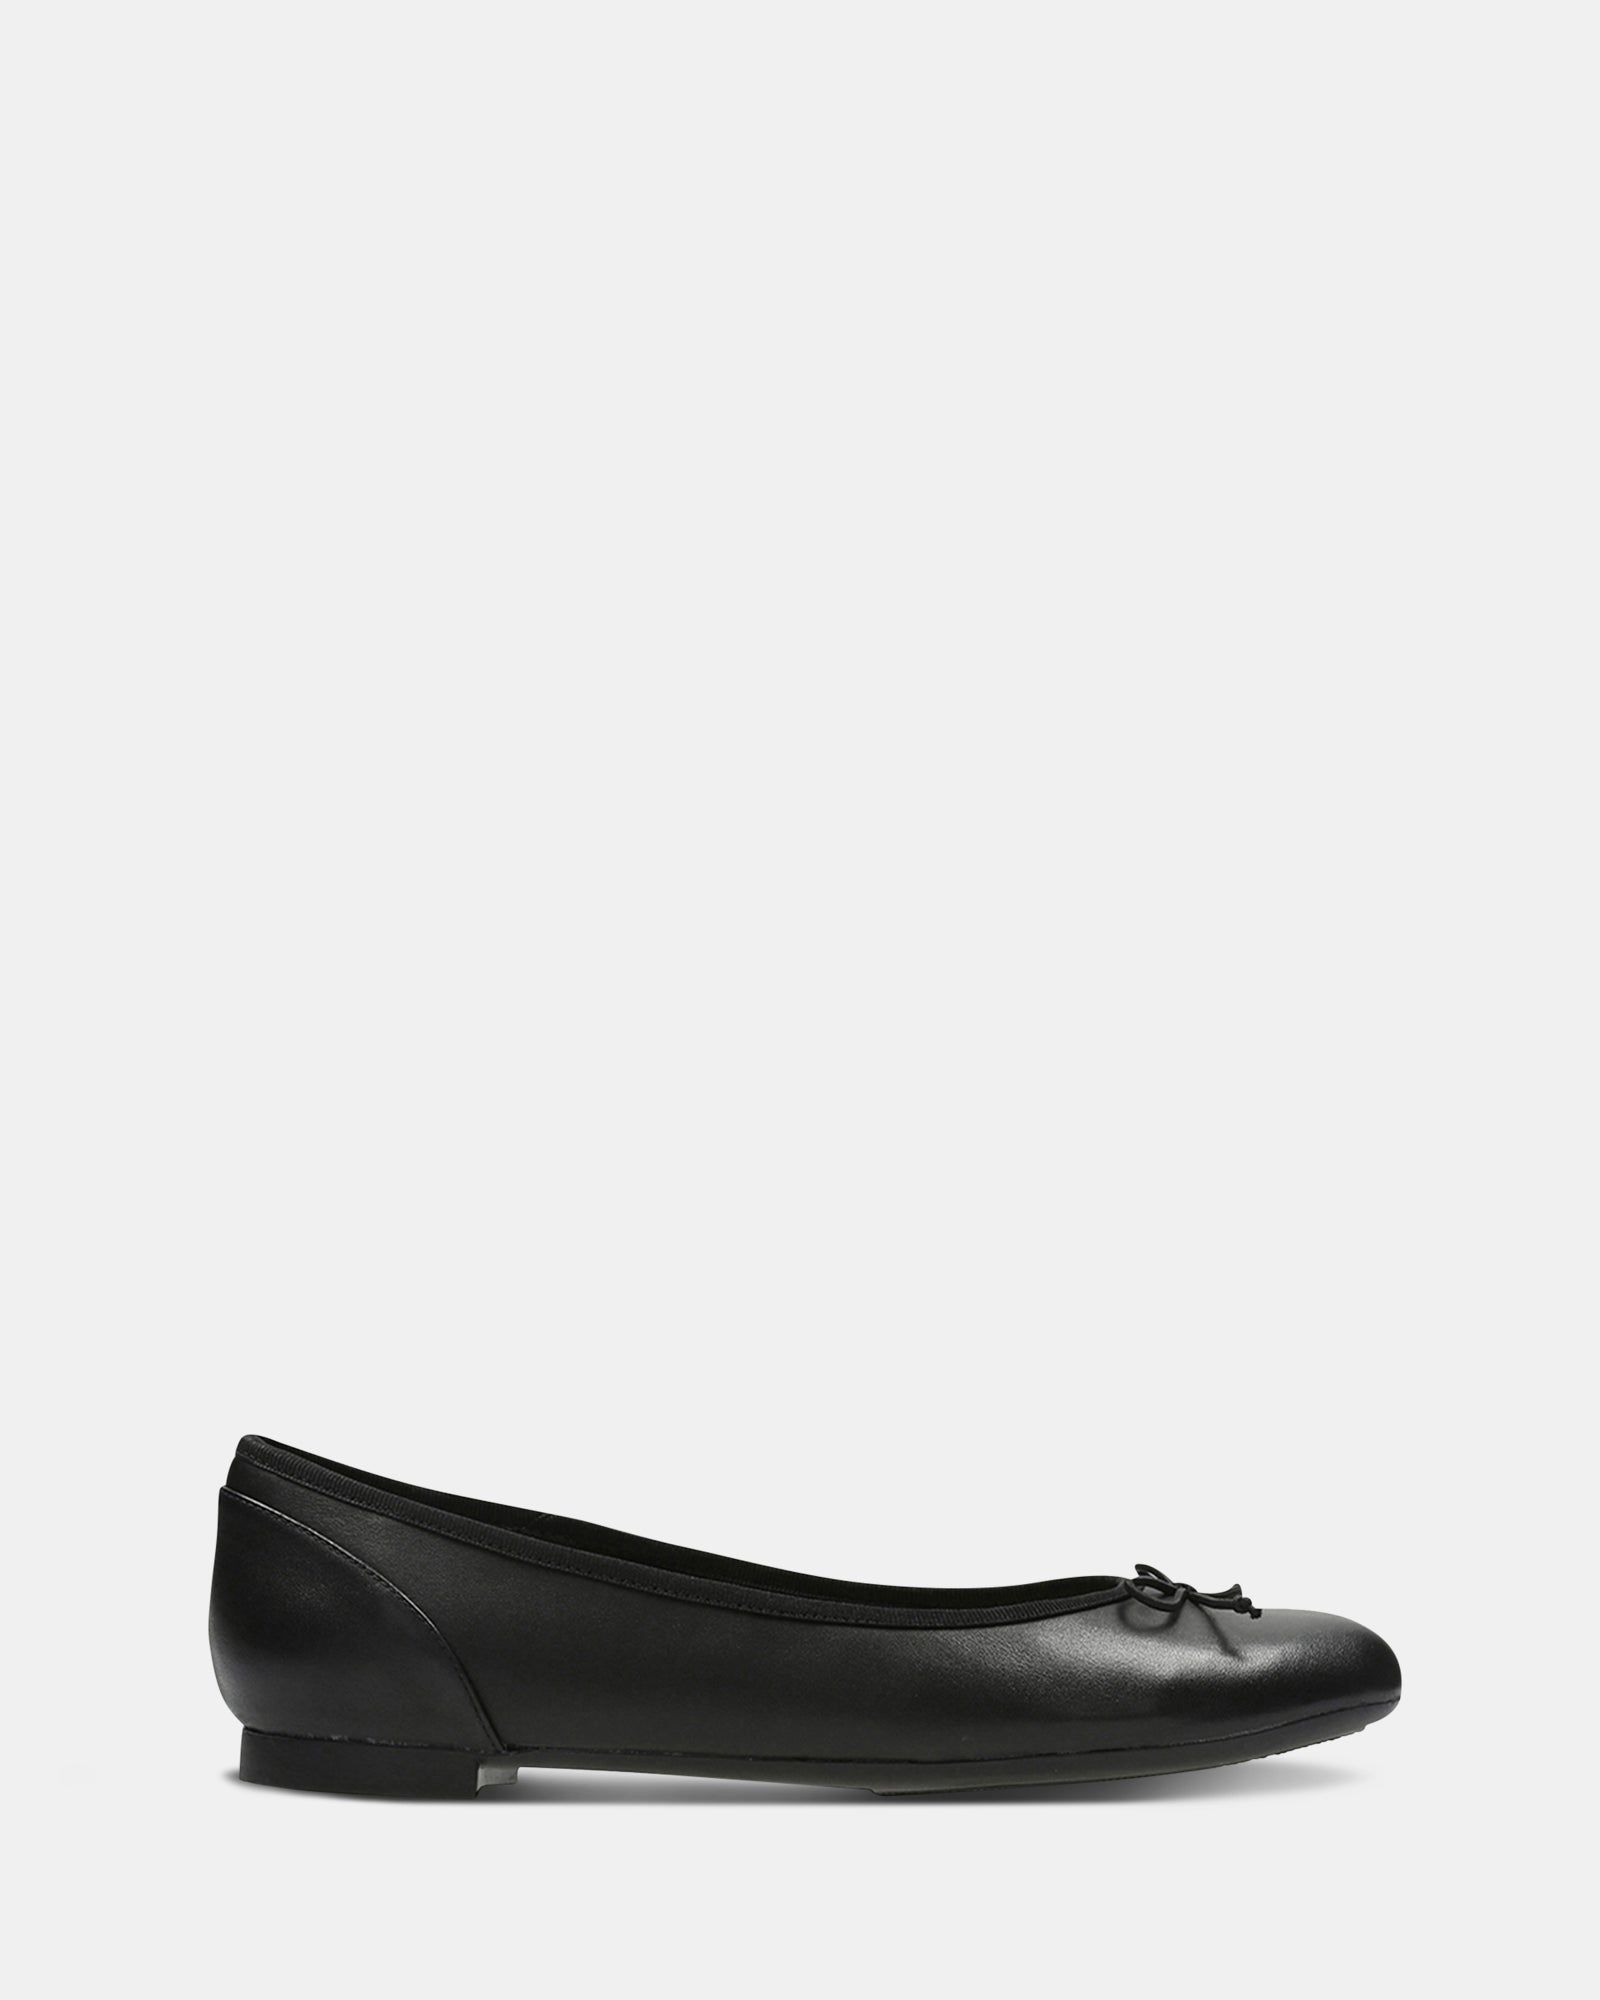 Couture Bloom Black Leather – Clarks